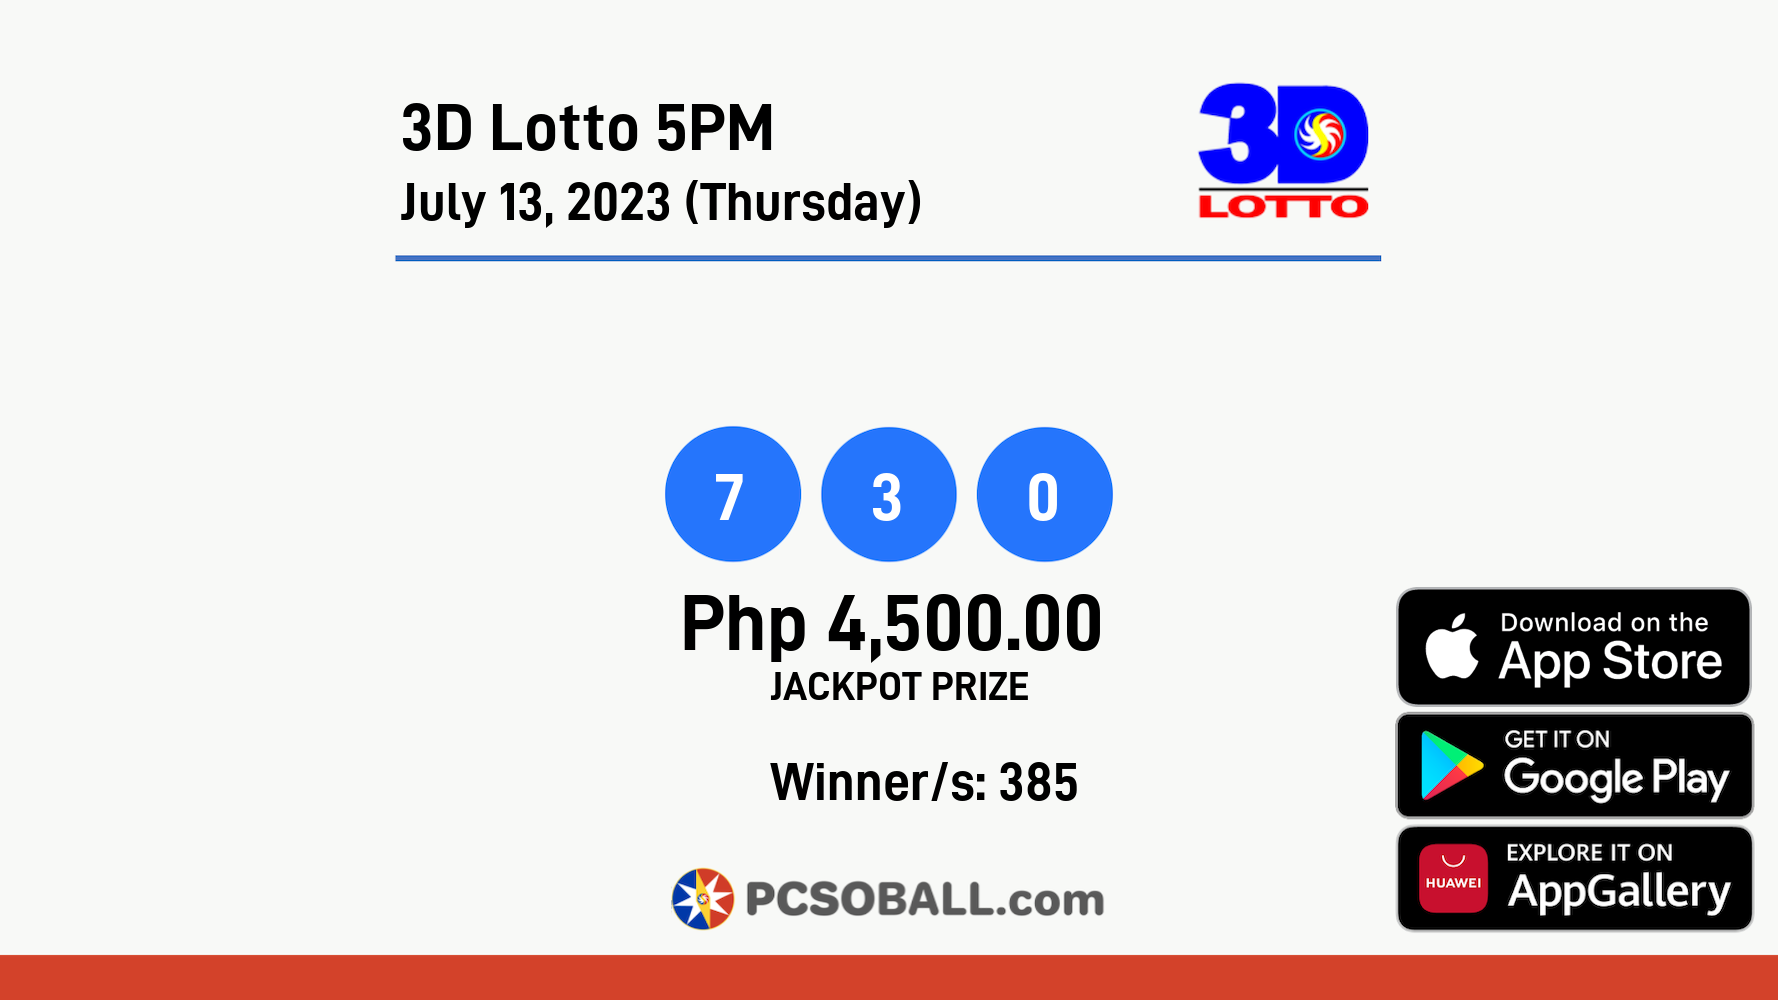 3D Lotto 5PM July 13, 2023 (Thursday) Result